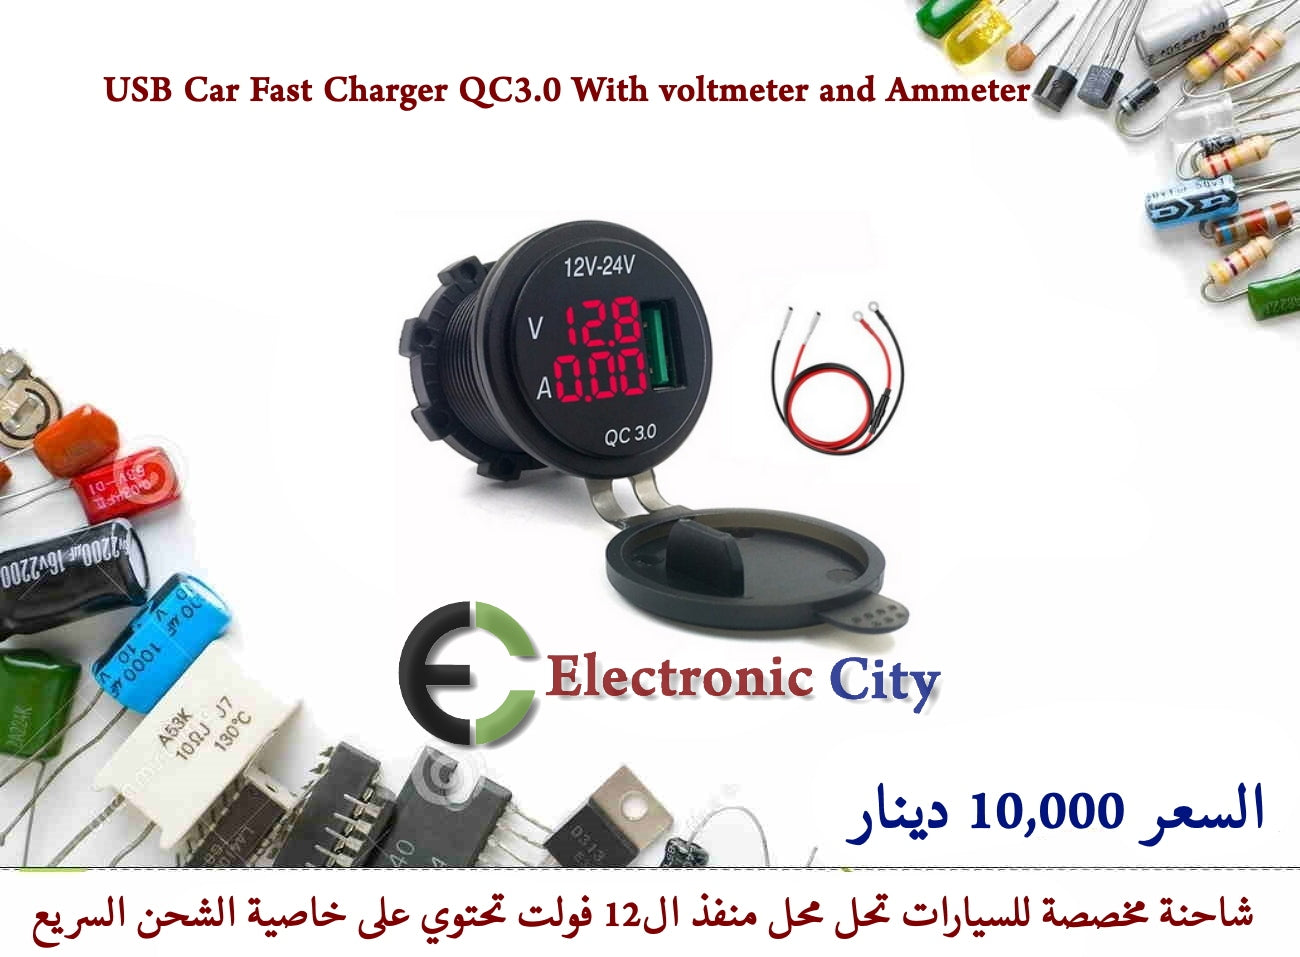 USB Car Fast Charger QC3.0 With voltmeter and Ammeter